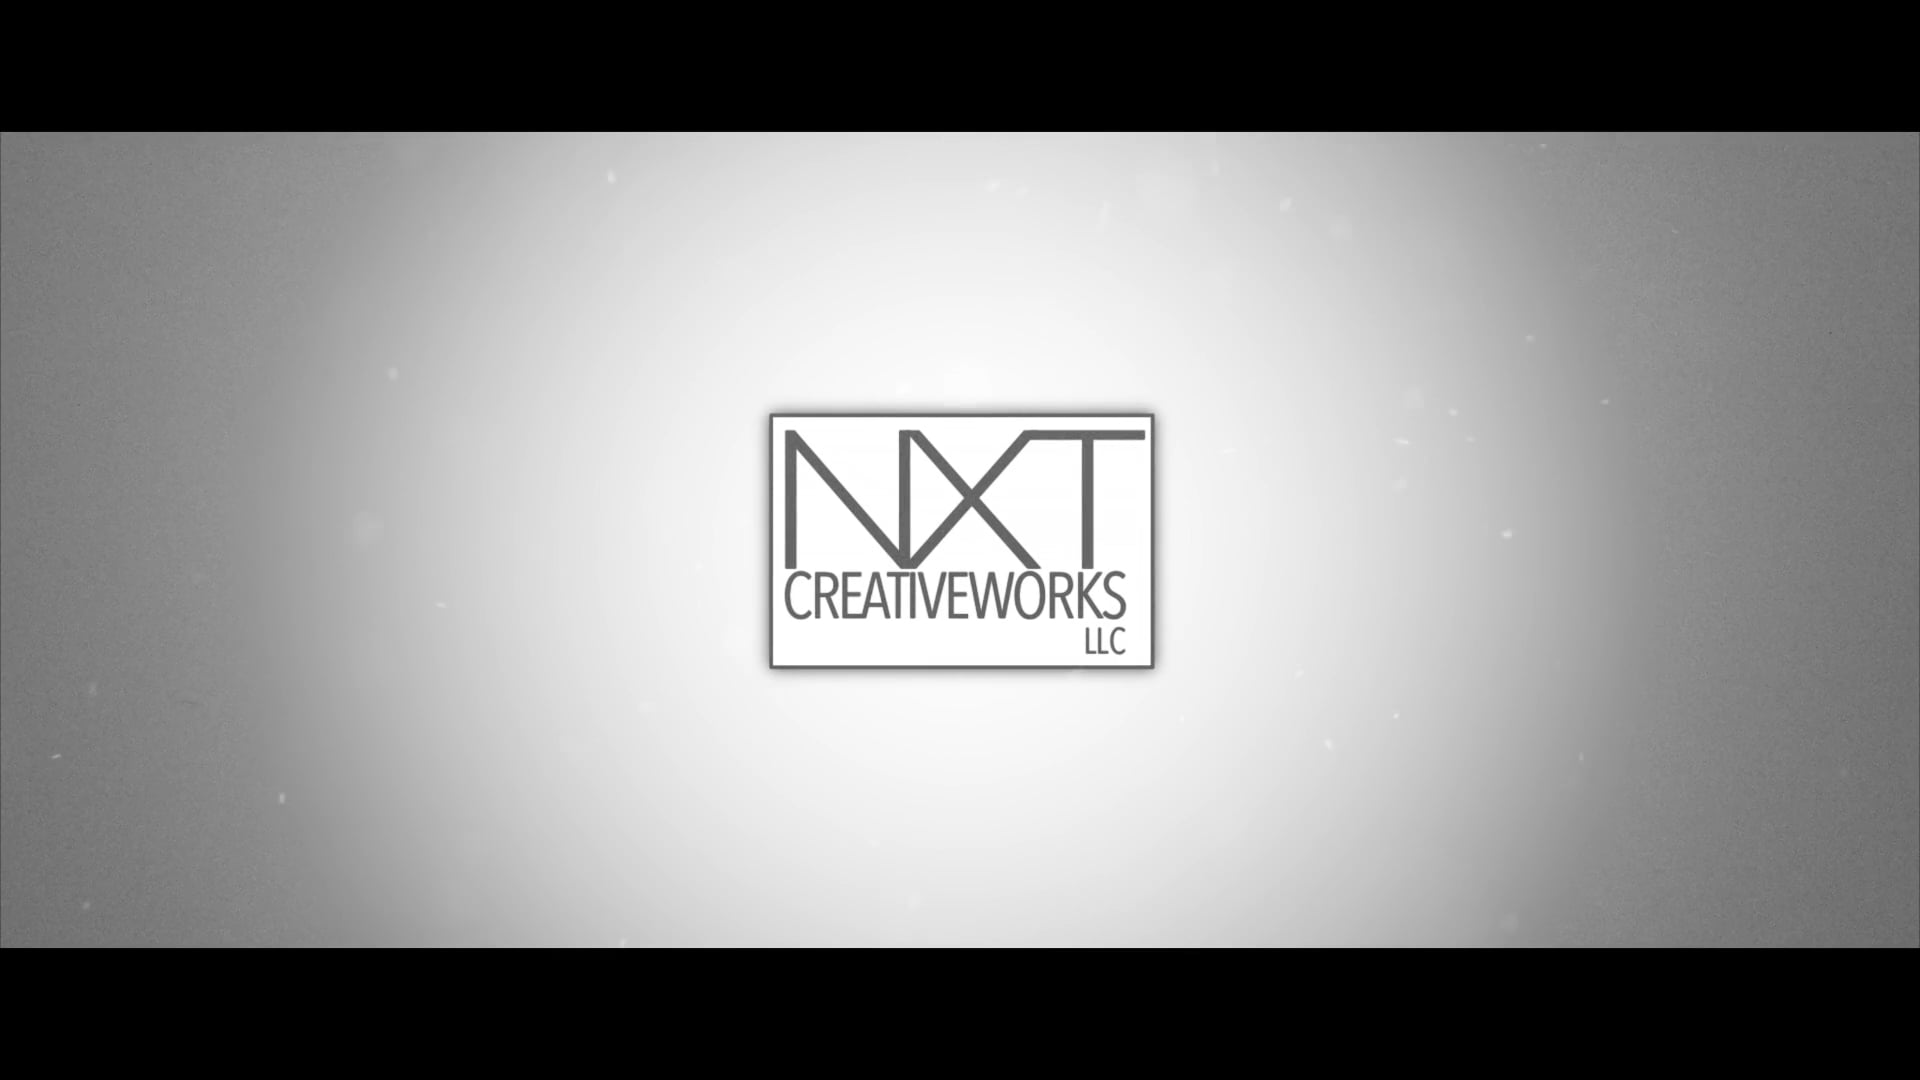 Promotional video thumbnail 1 for NXT Creativeworks, LLC